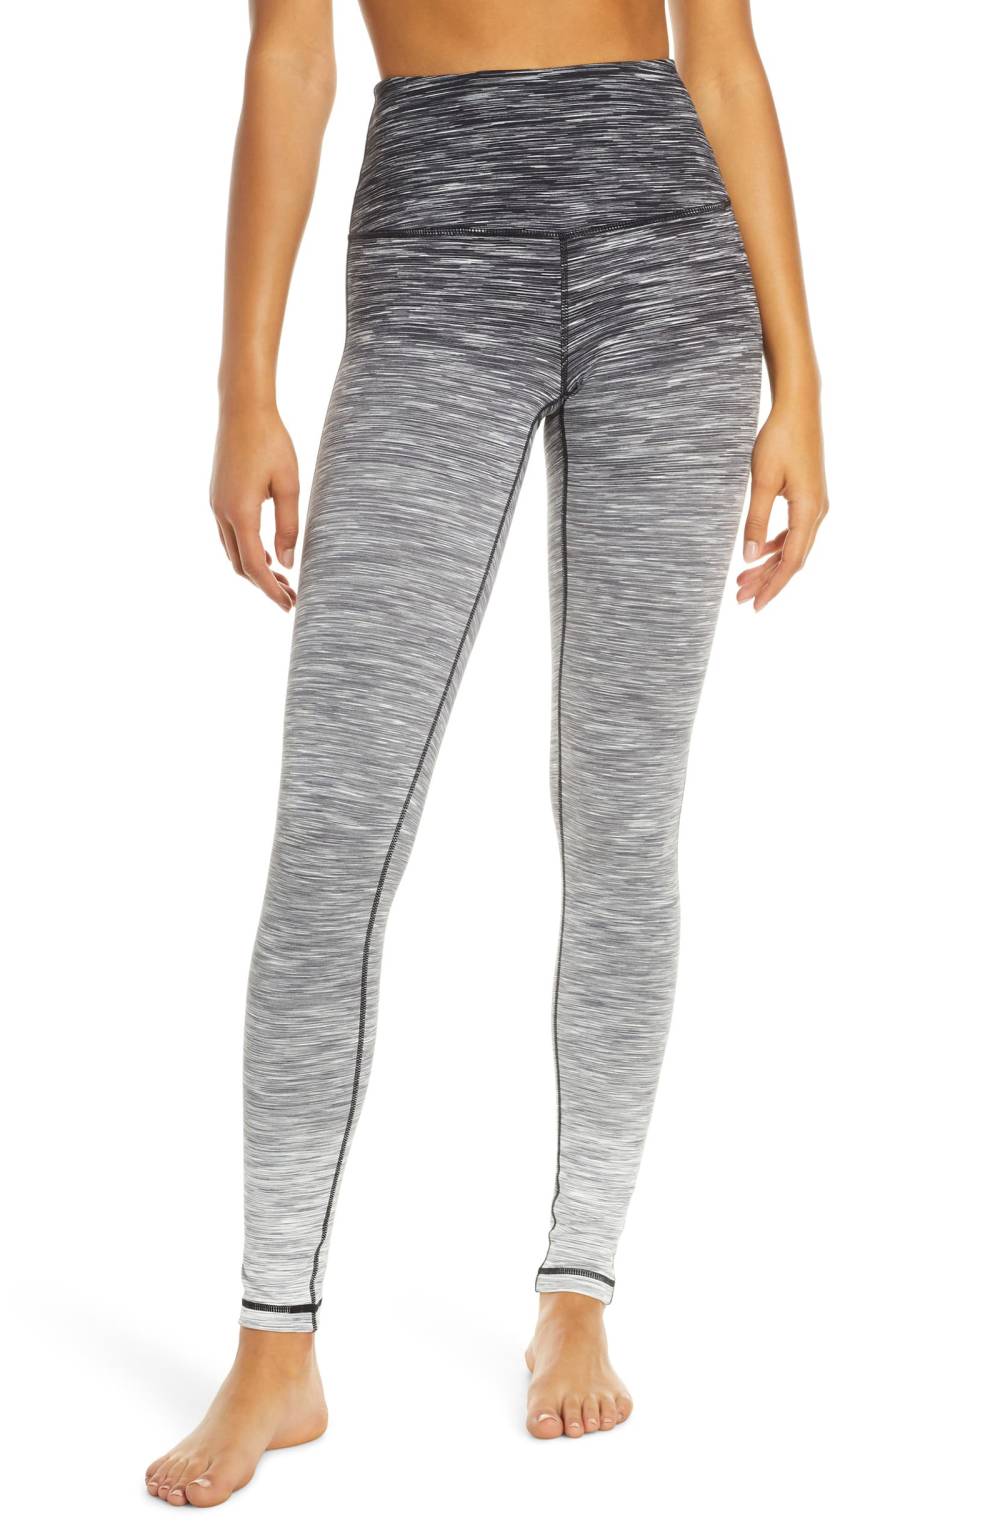 Leggings Buying Guide: The Perfect Pair for Your Every Need